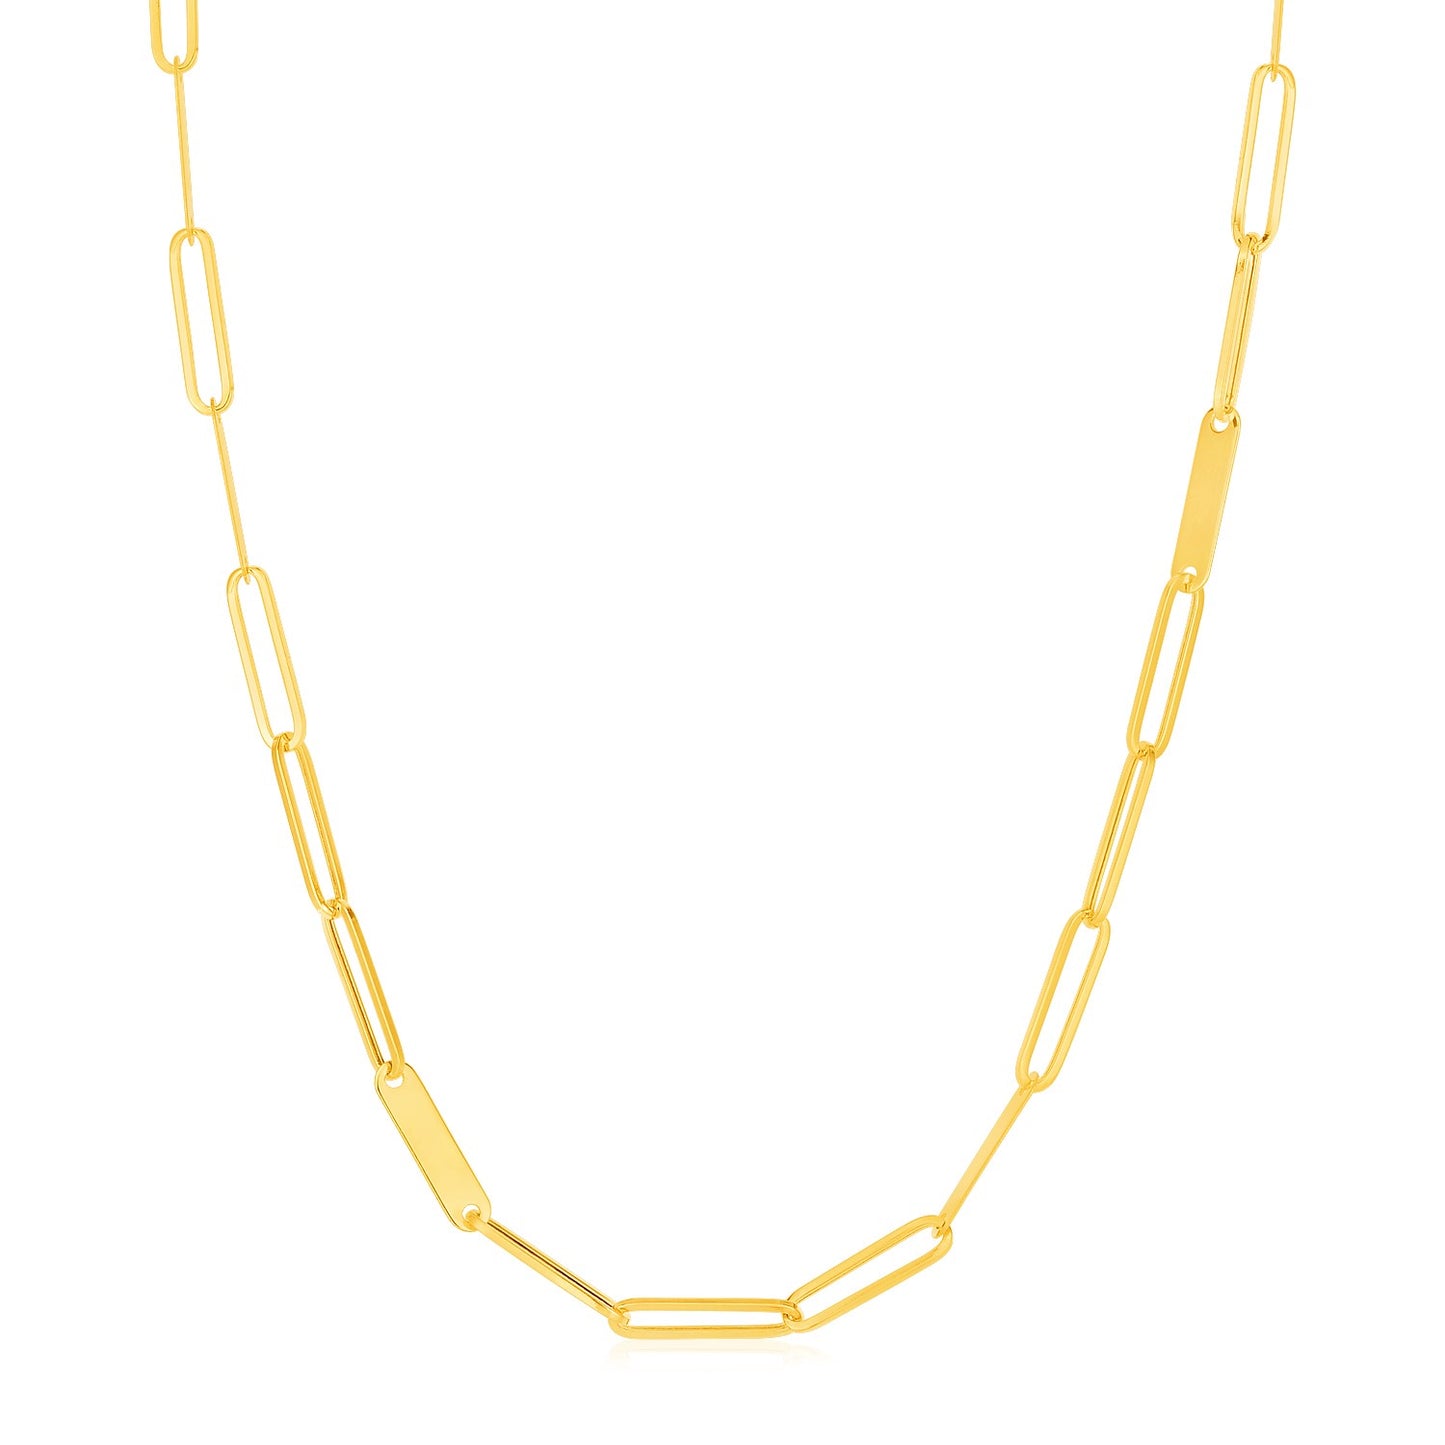 14k Yellow Gold Alternating Paperclip Chain Link and Gold Bar Necklace